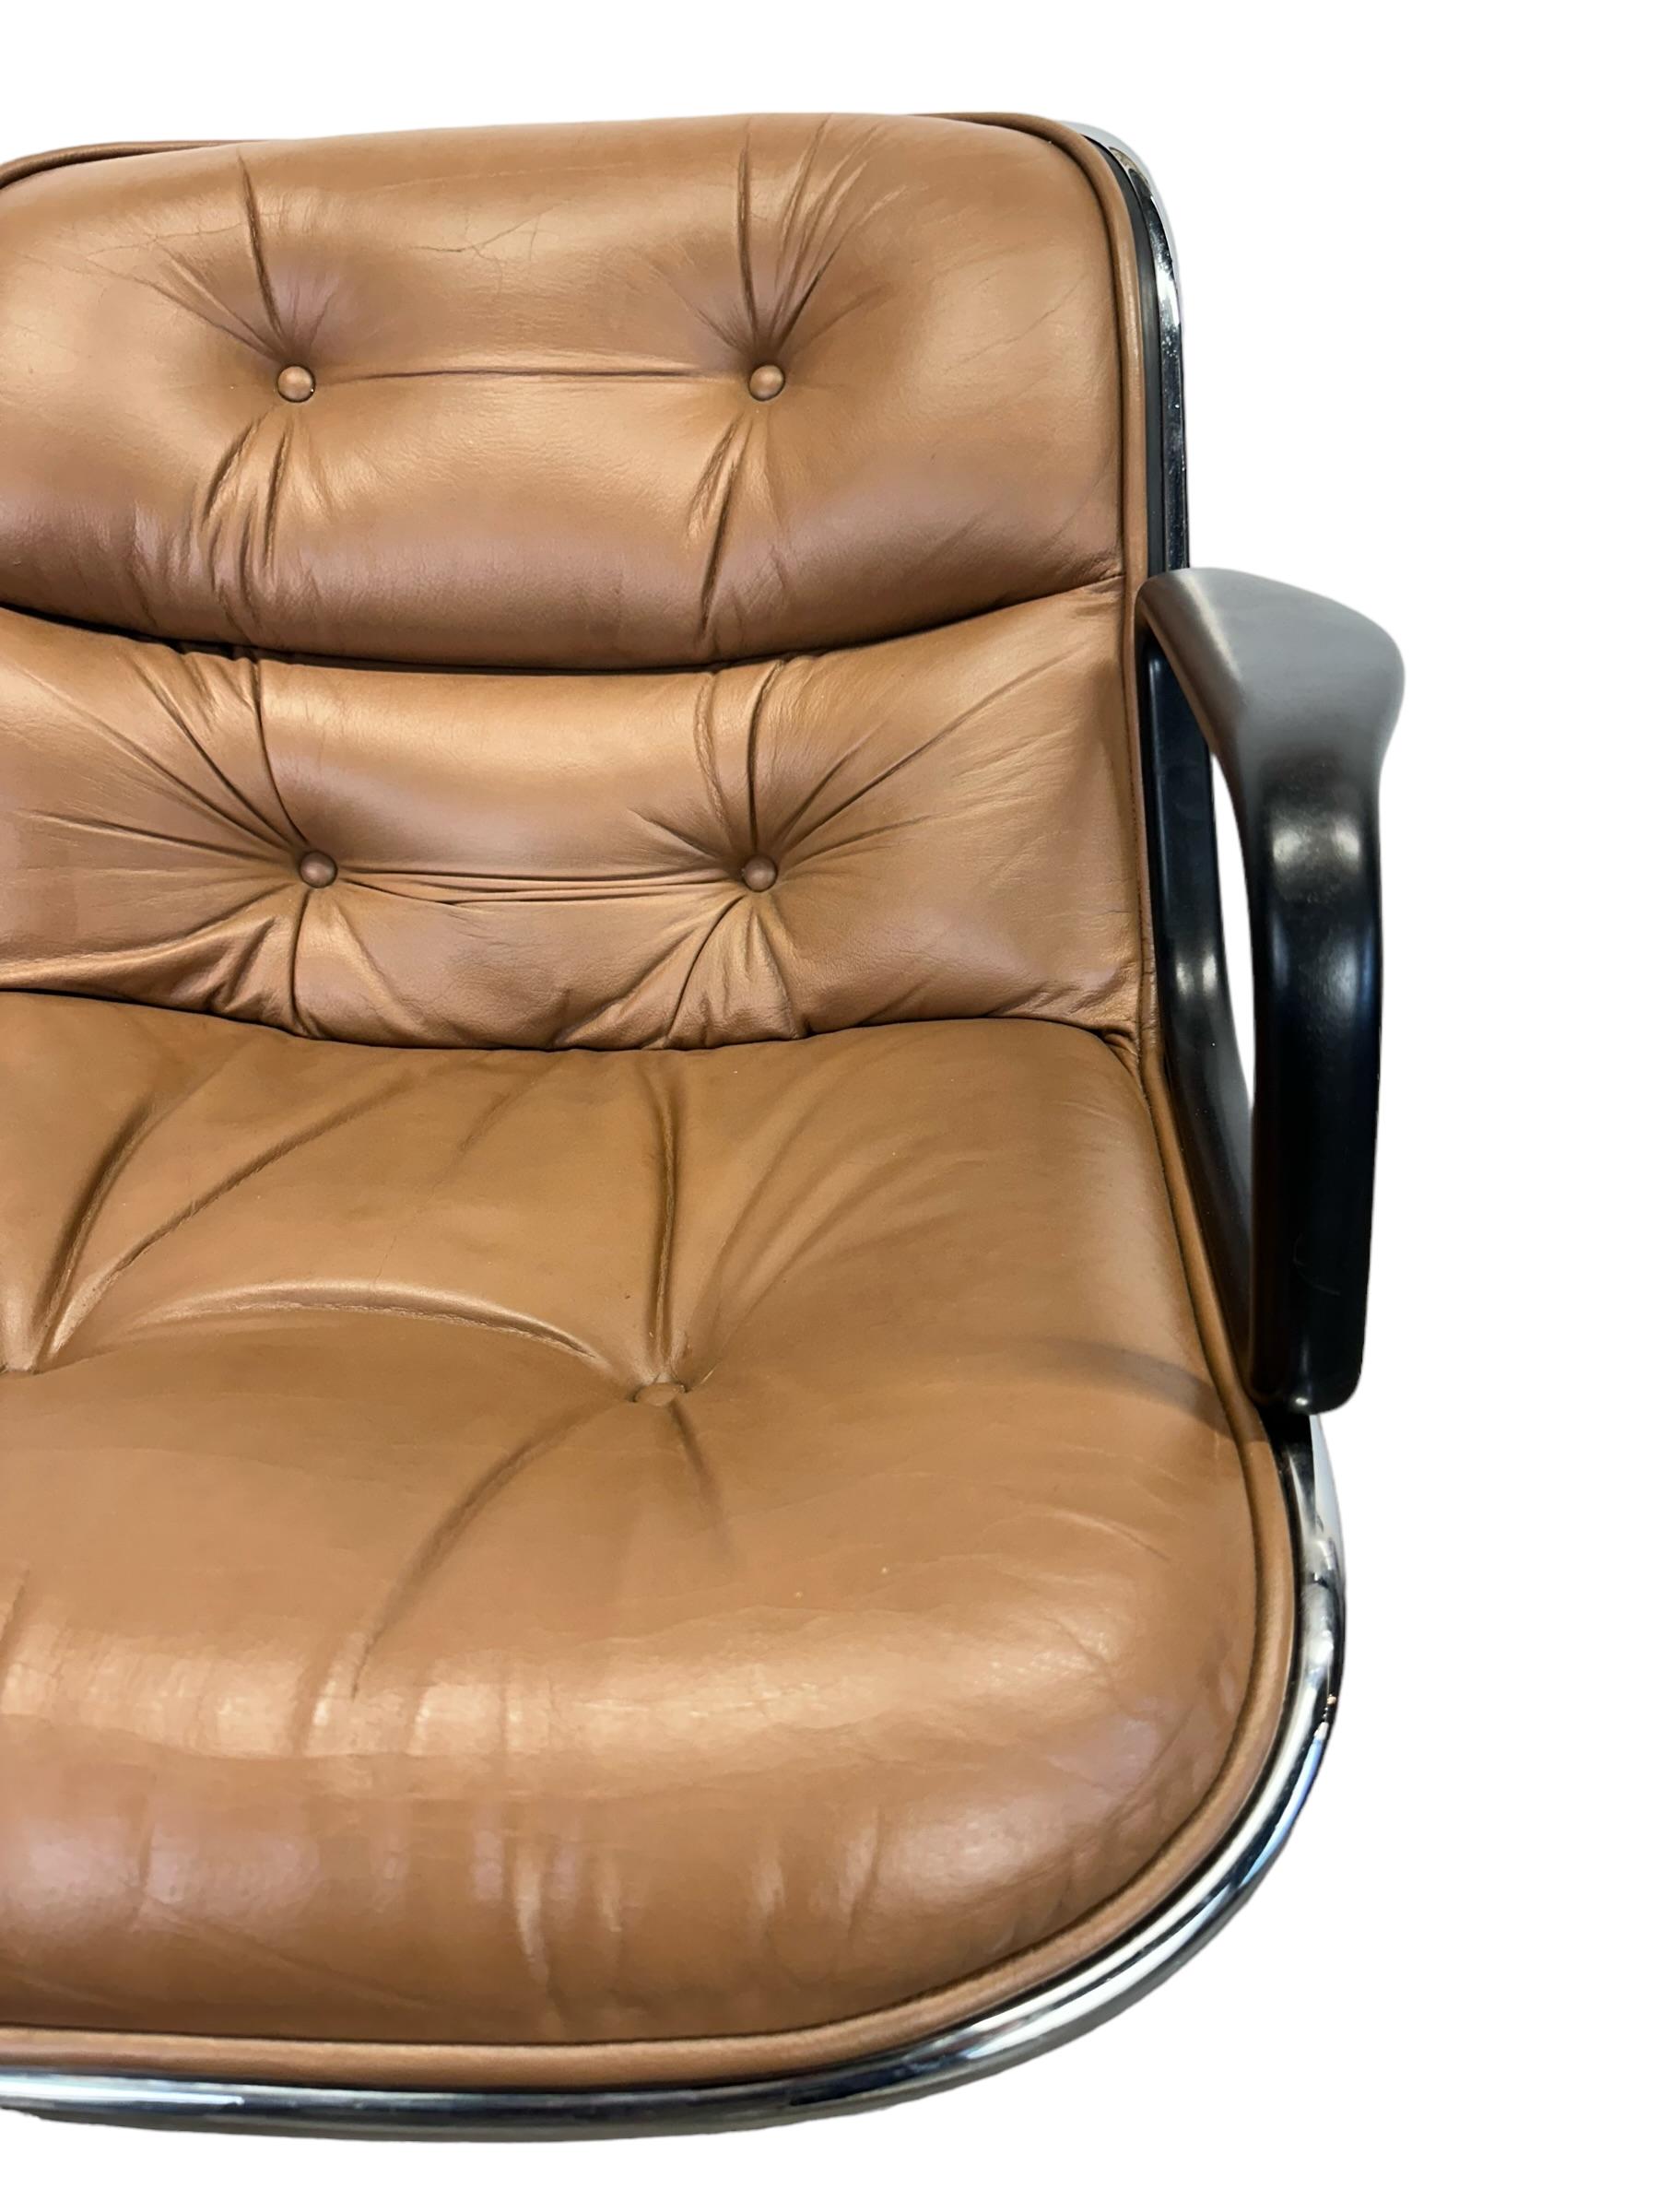 Charles Pollock Executive Desk Chair in Brown Leather In Fair Condition For Sale In Brooklyn, NY